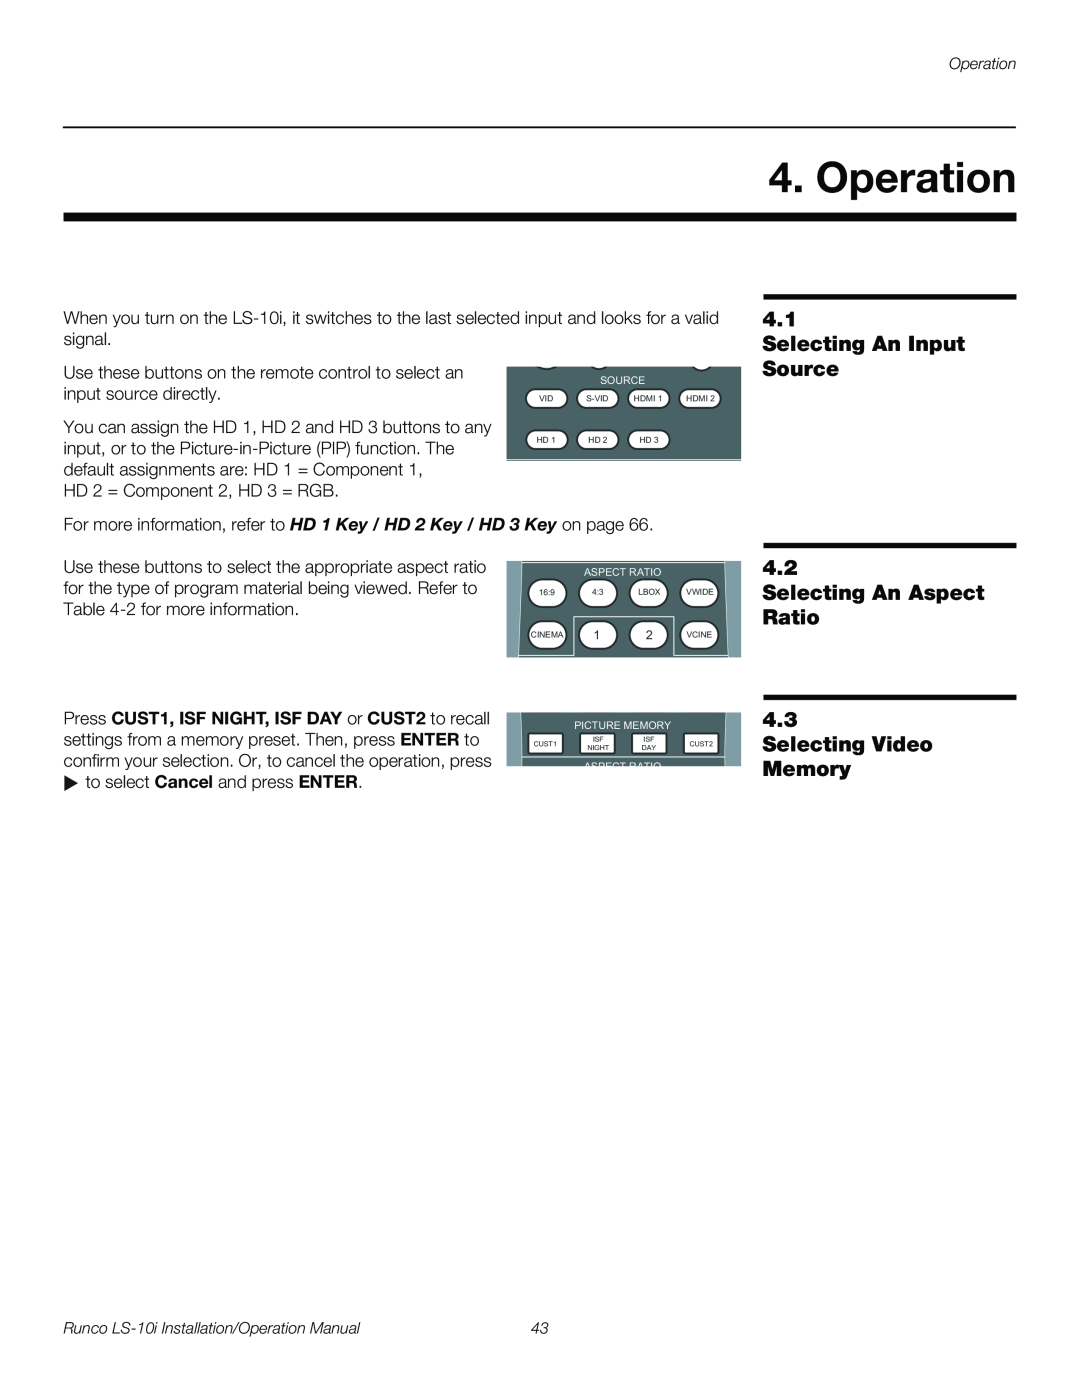 Runco LS-10I operation manual Operation, Selecting An Input, Source, Selecting An Aspect Ratio 4.3, Selecting Video Memory 